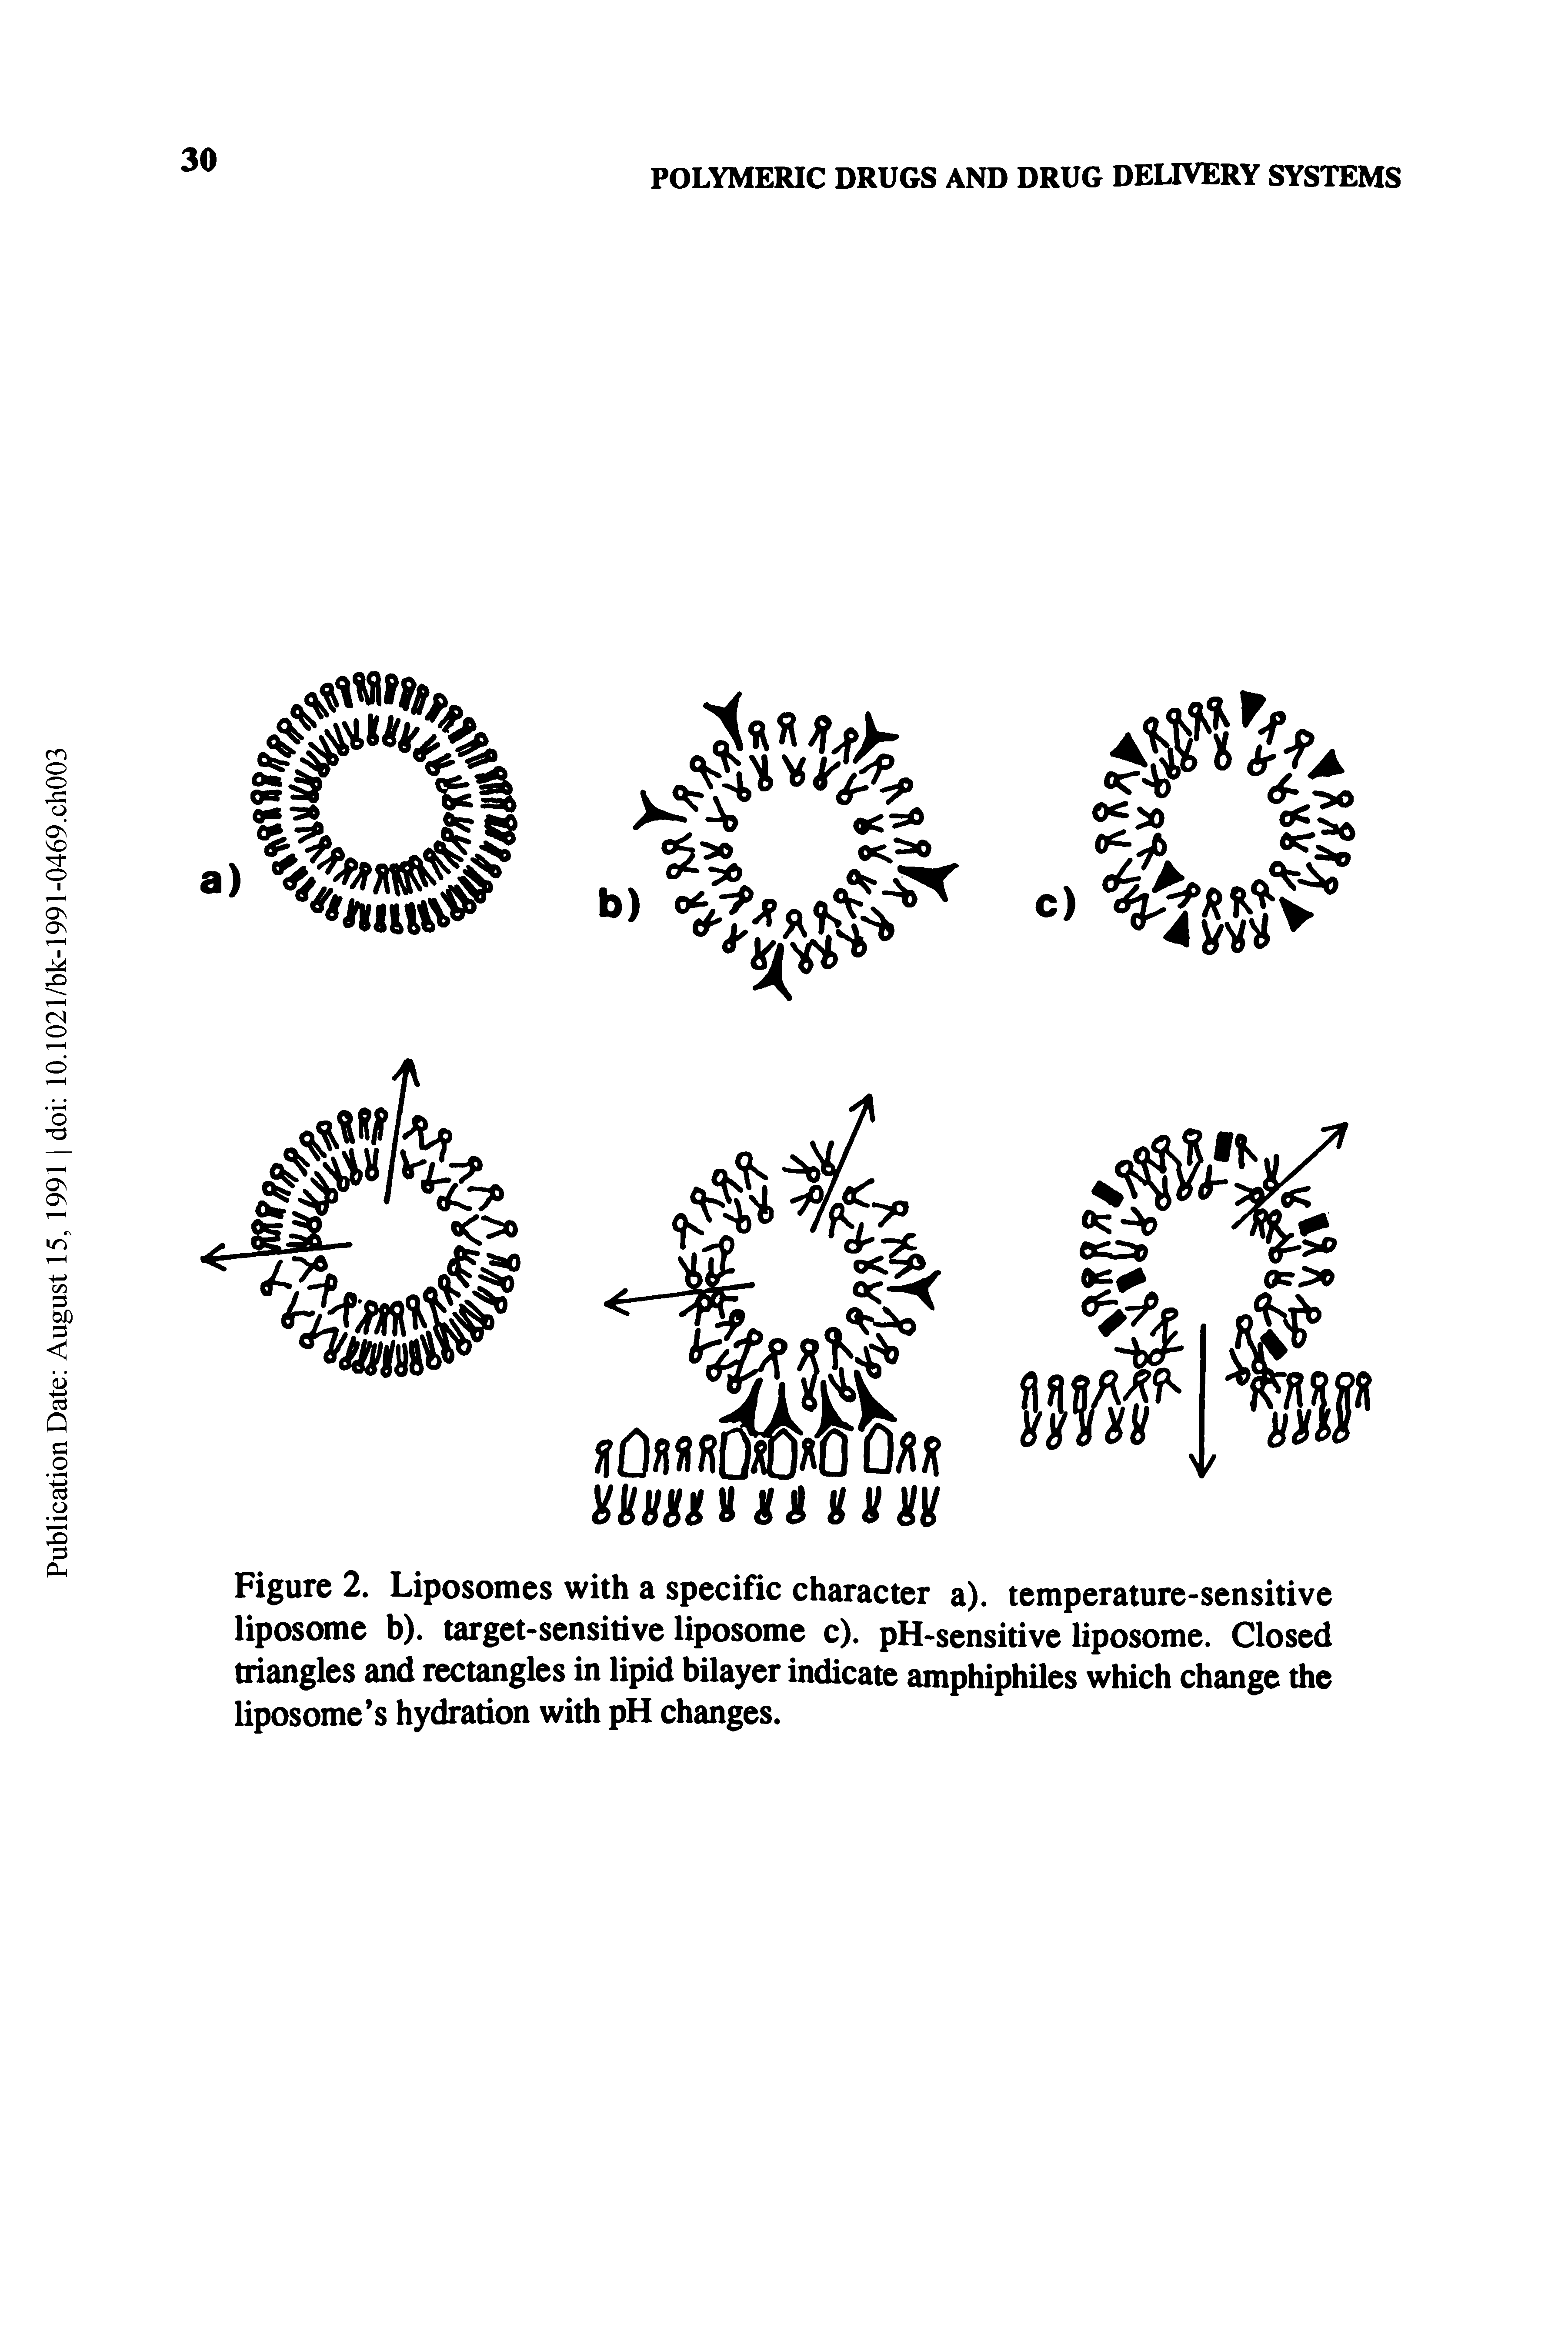 Figure 2. Liposomes with a specific character a), temperature-sensitive liposome b). target-sensitive liposome c). pH-sensitive liposome. Closed triangles and rectangles in lipid bilayer indicate amphiphiles which change the liposome s hydration with pH changes.